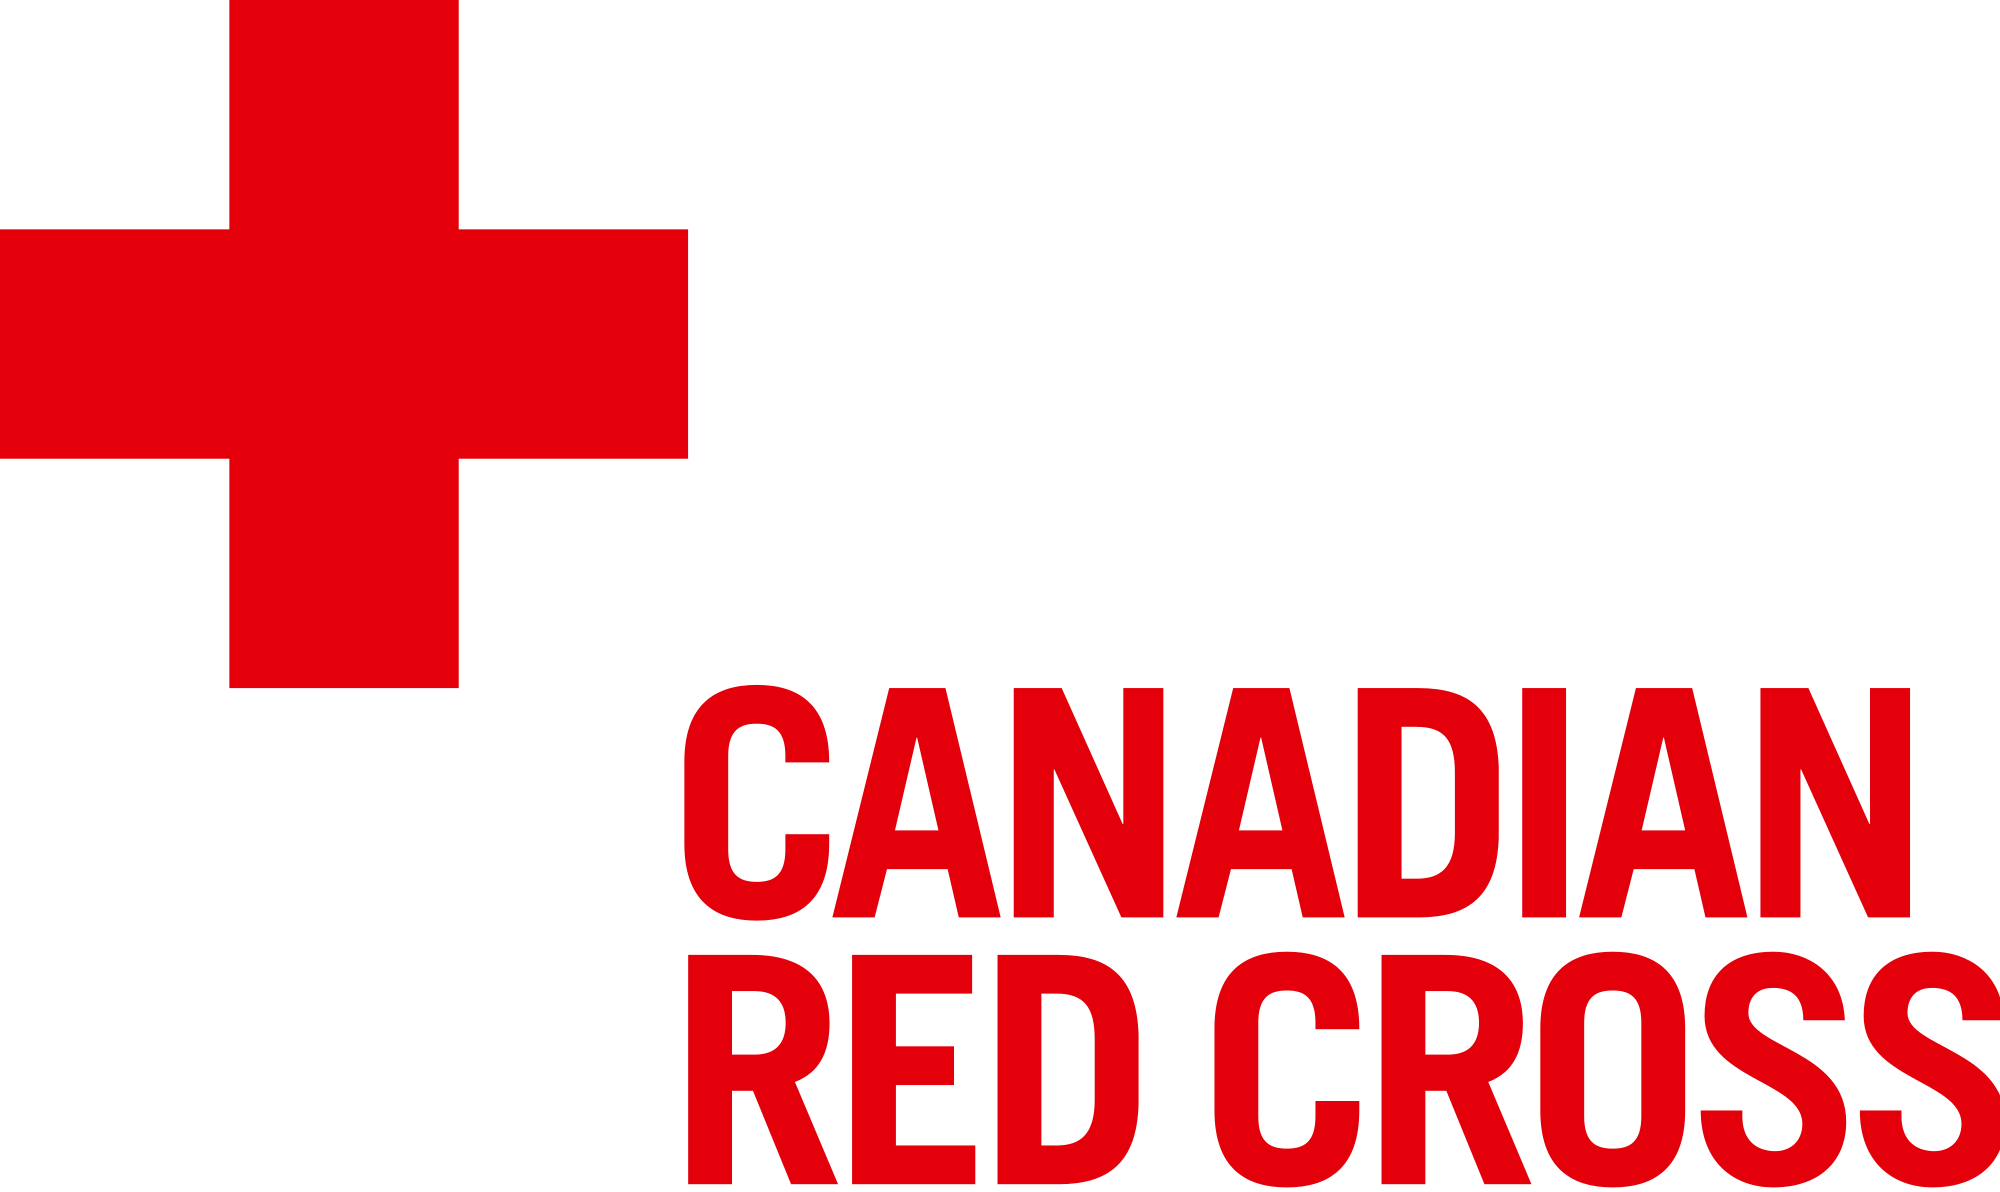 Canadian Red Cross Logo - File:Canadian Red Cross.svg - Wikimedia Commons